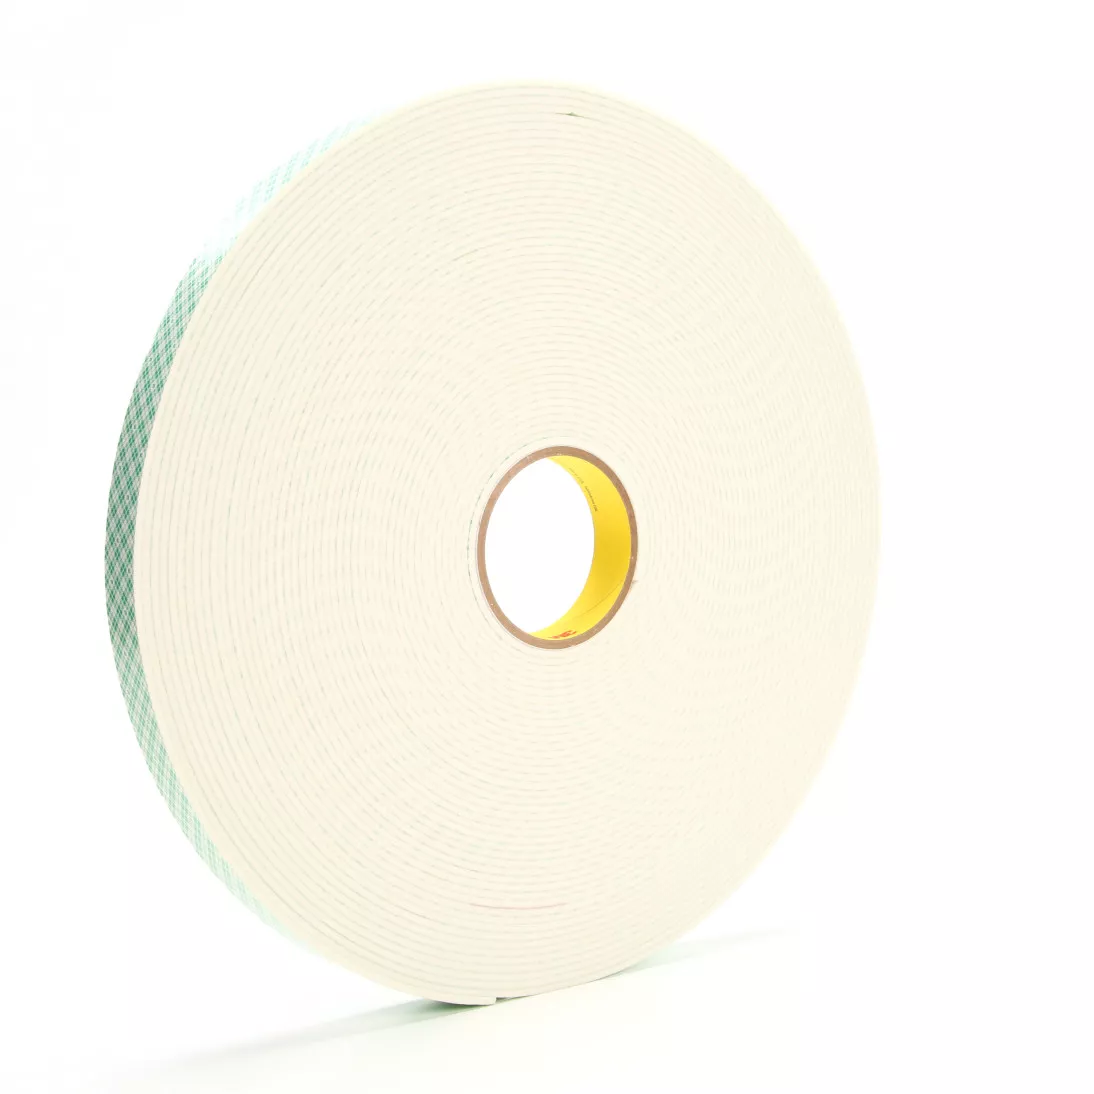 3M™ Double Coated Urethane Foam Tape 4008, Off White, 1 in x 36 yd, 125
mil, 9 rolls per case